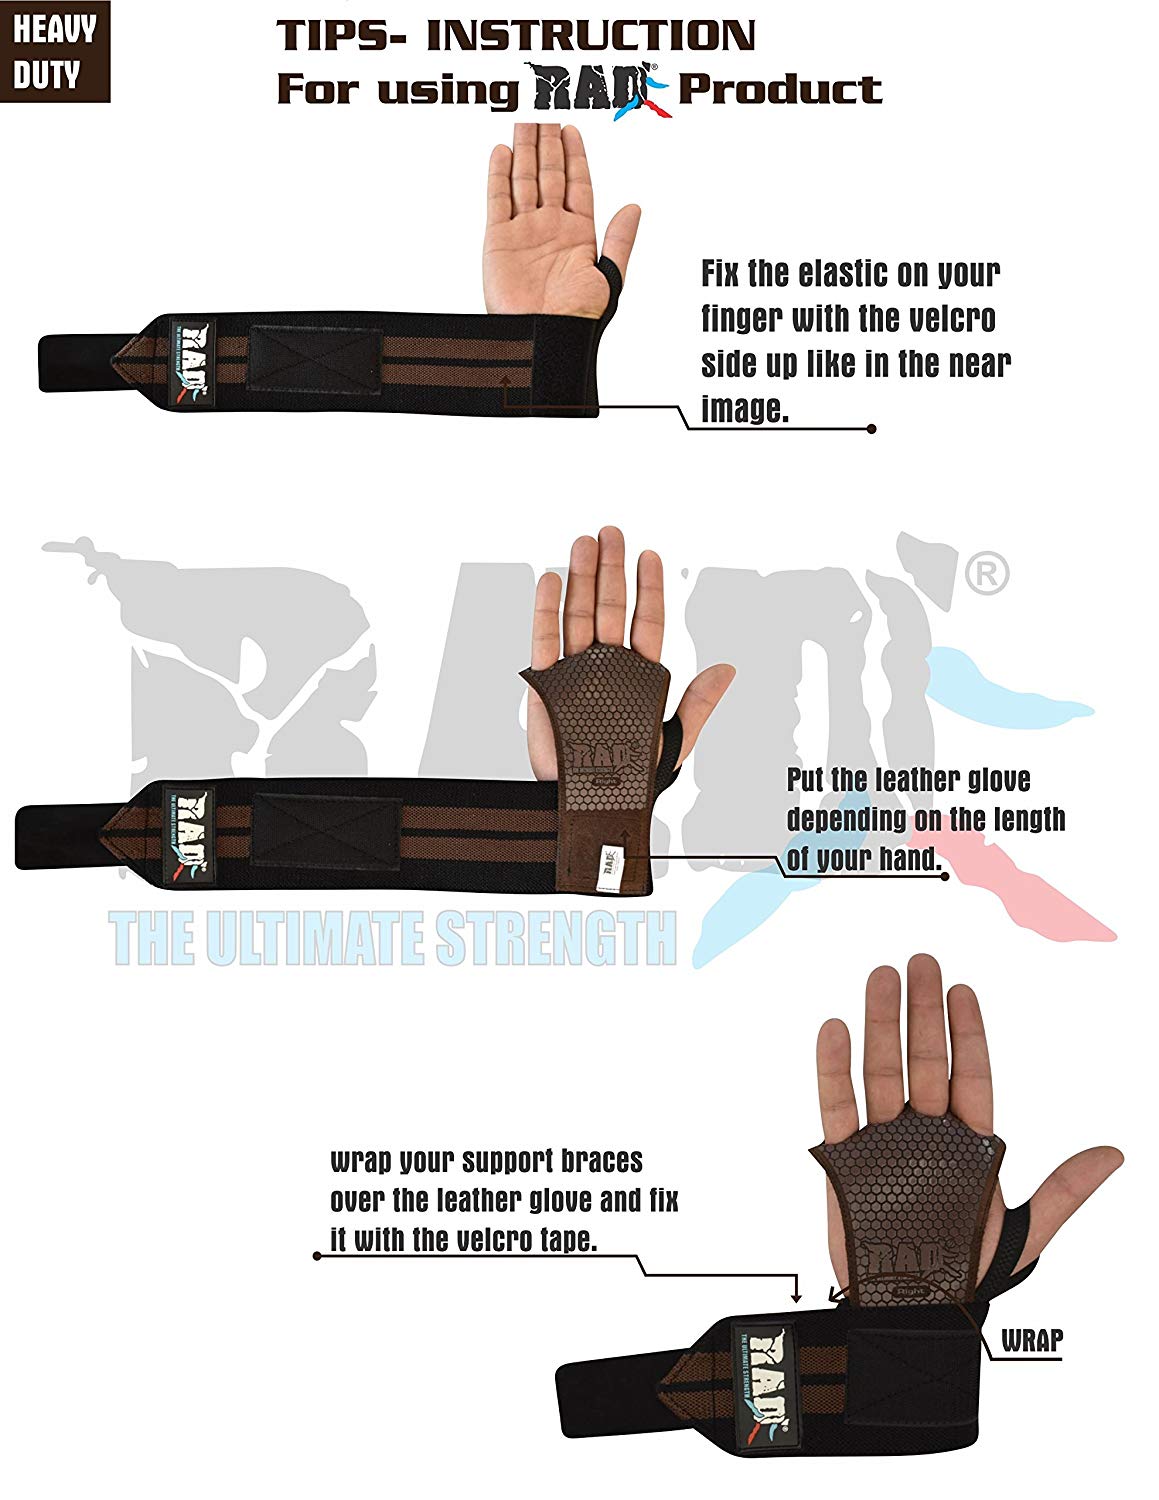 How to use Hand Grip